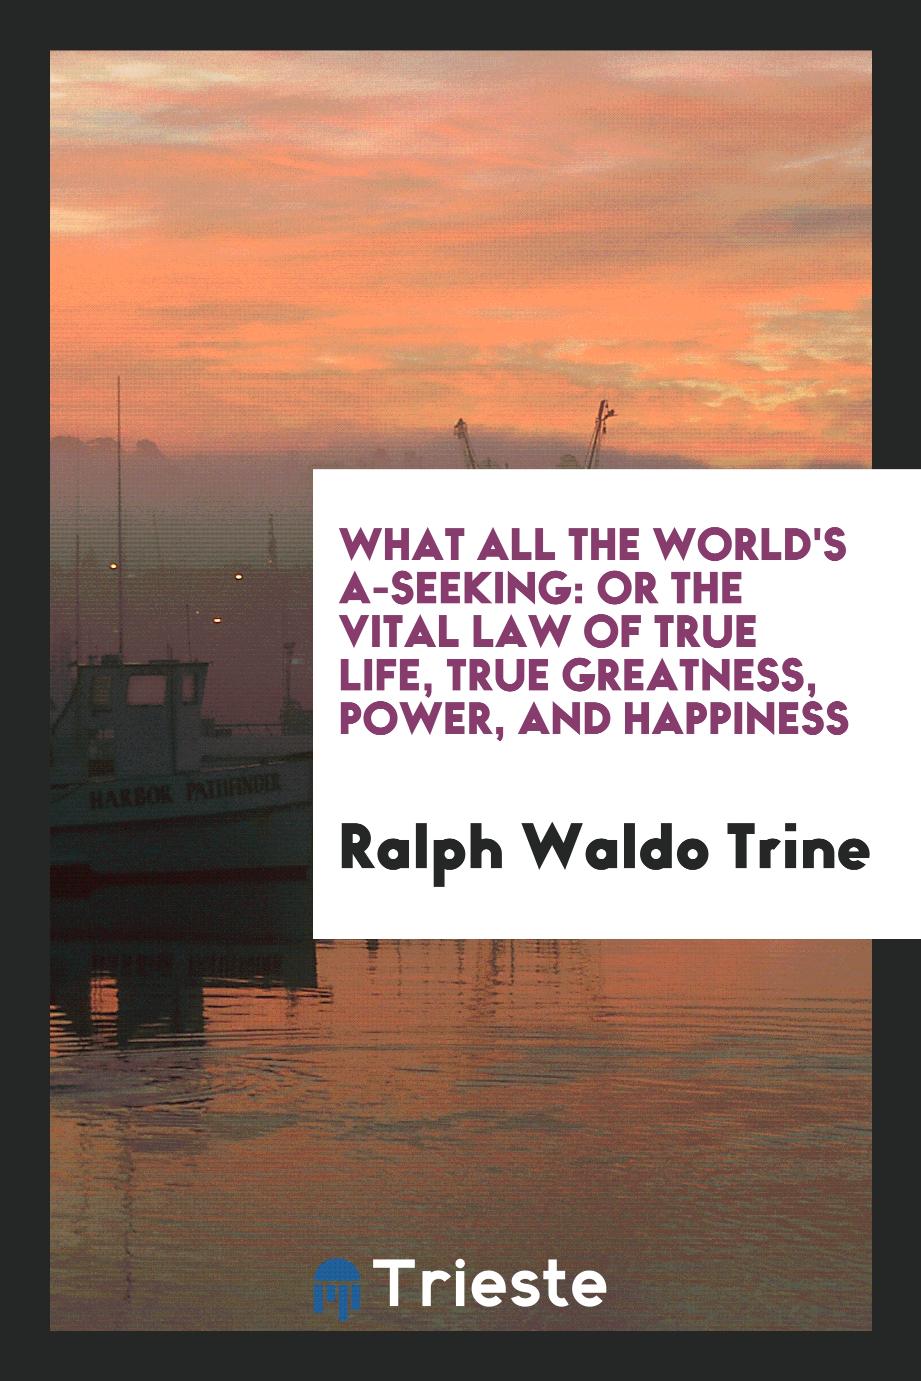 What all the world's a-seeking: or the vital law of true life, true greatness, power, and happiness